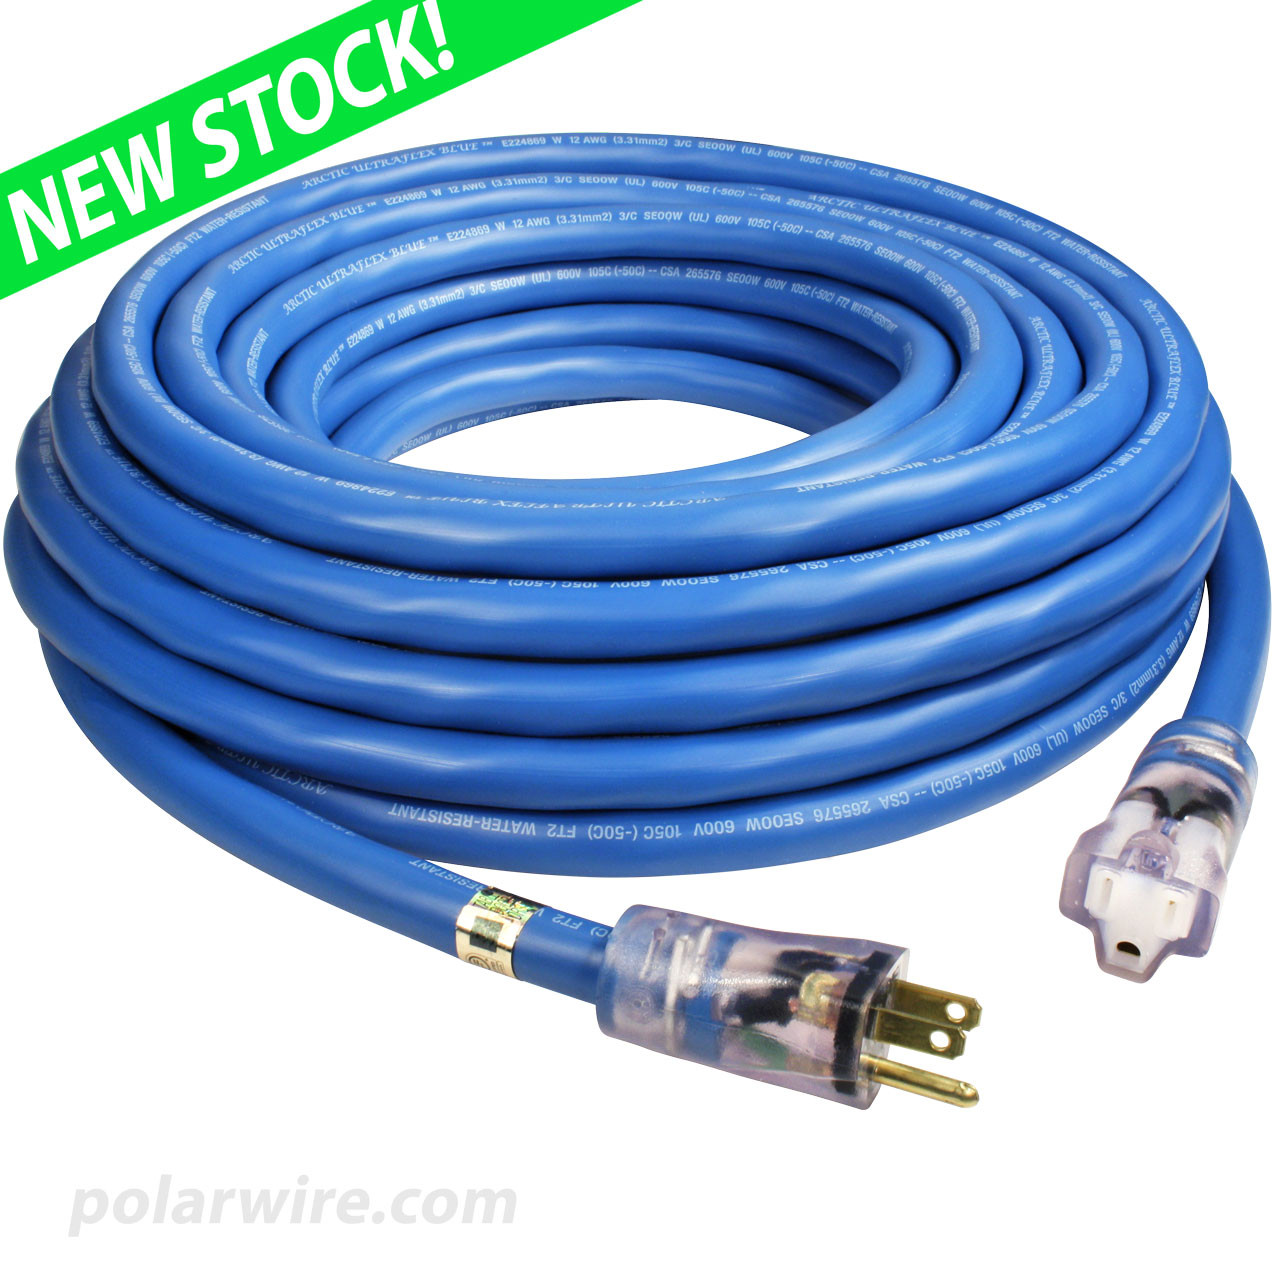 50 foot 12 gauge Arctic Ultraflex Blue extension cord single outlet power cord with molded clear NEMA 5-15 lighted ends